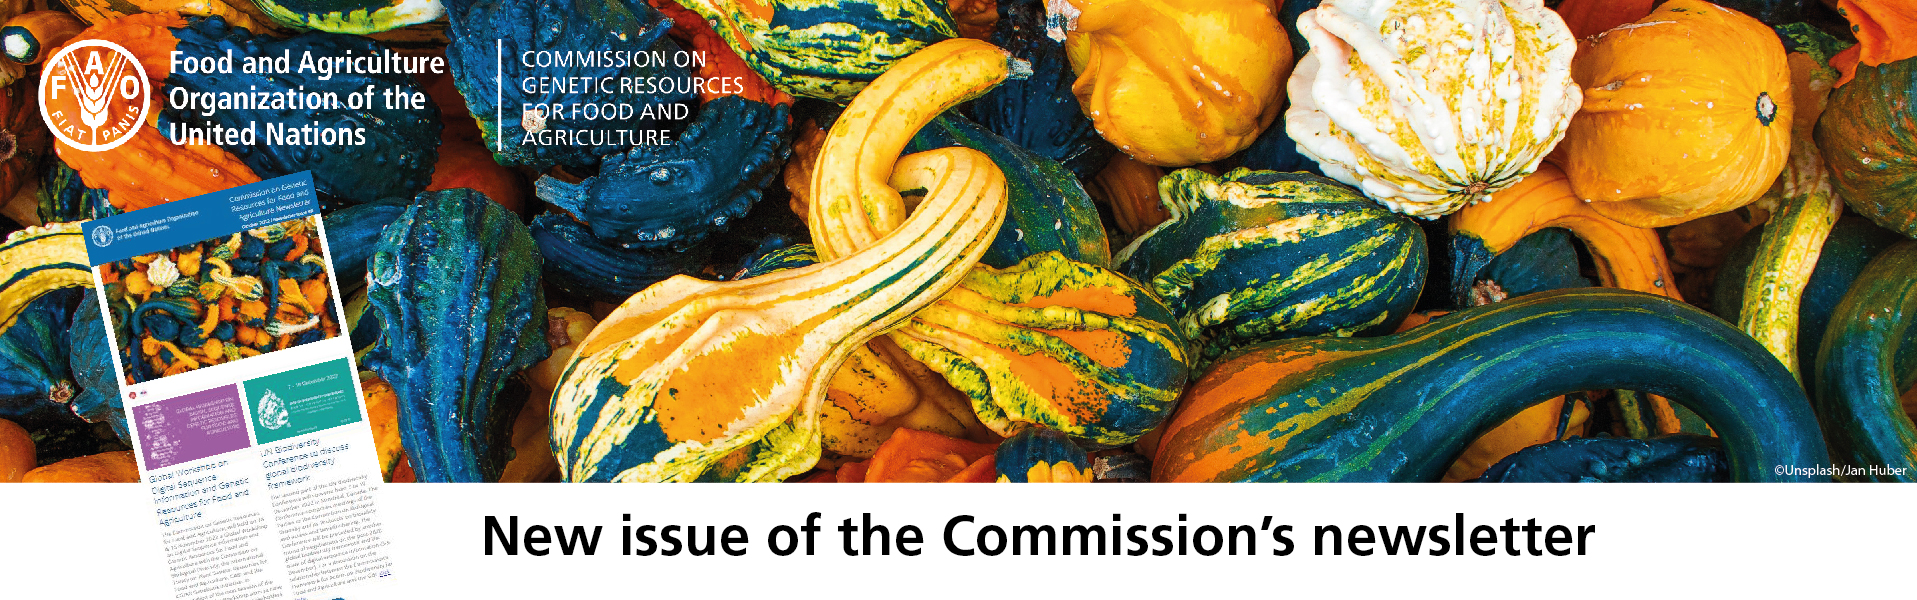 Commission on Genetic Resources for Food and Agriculture | Food and  Agriculture Organization of the United Nations